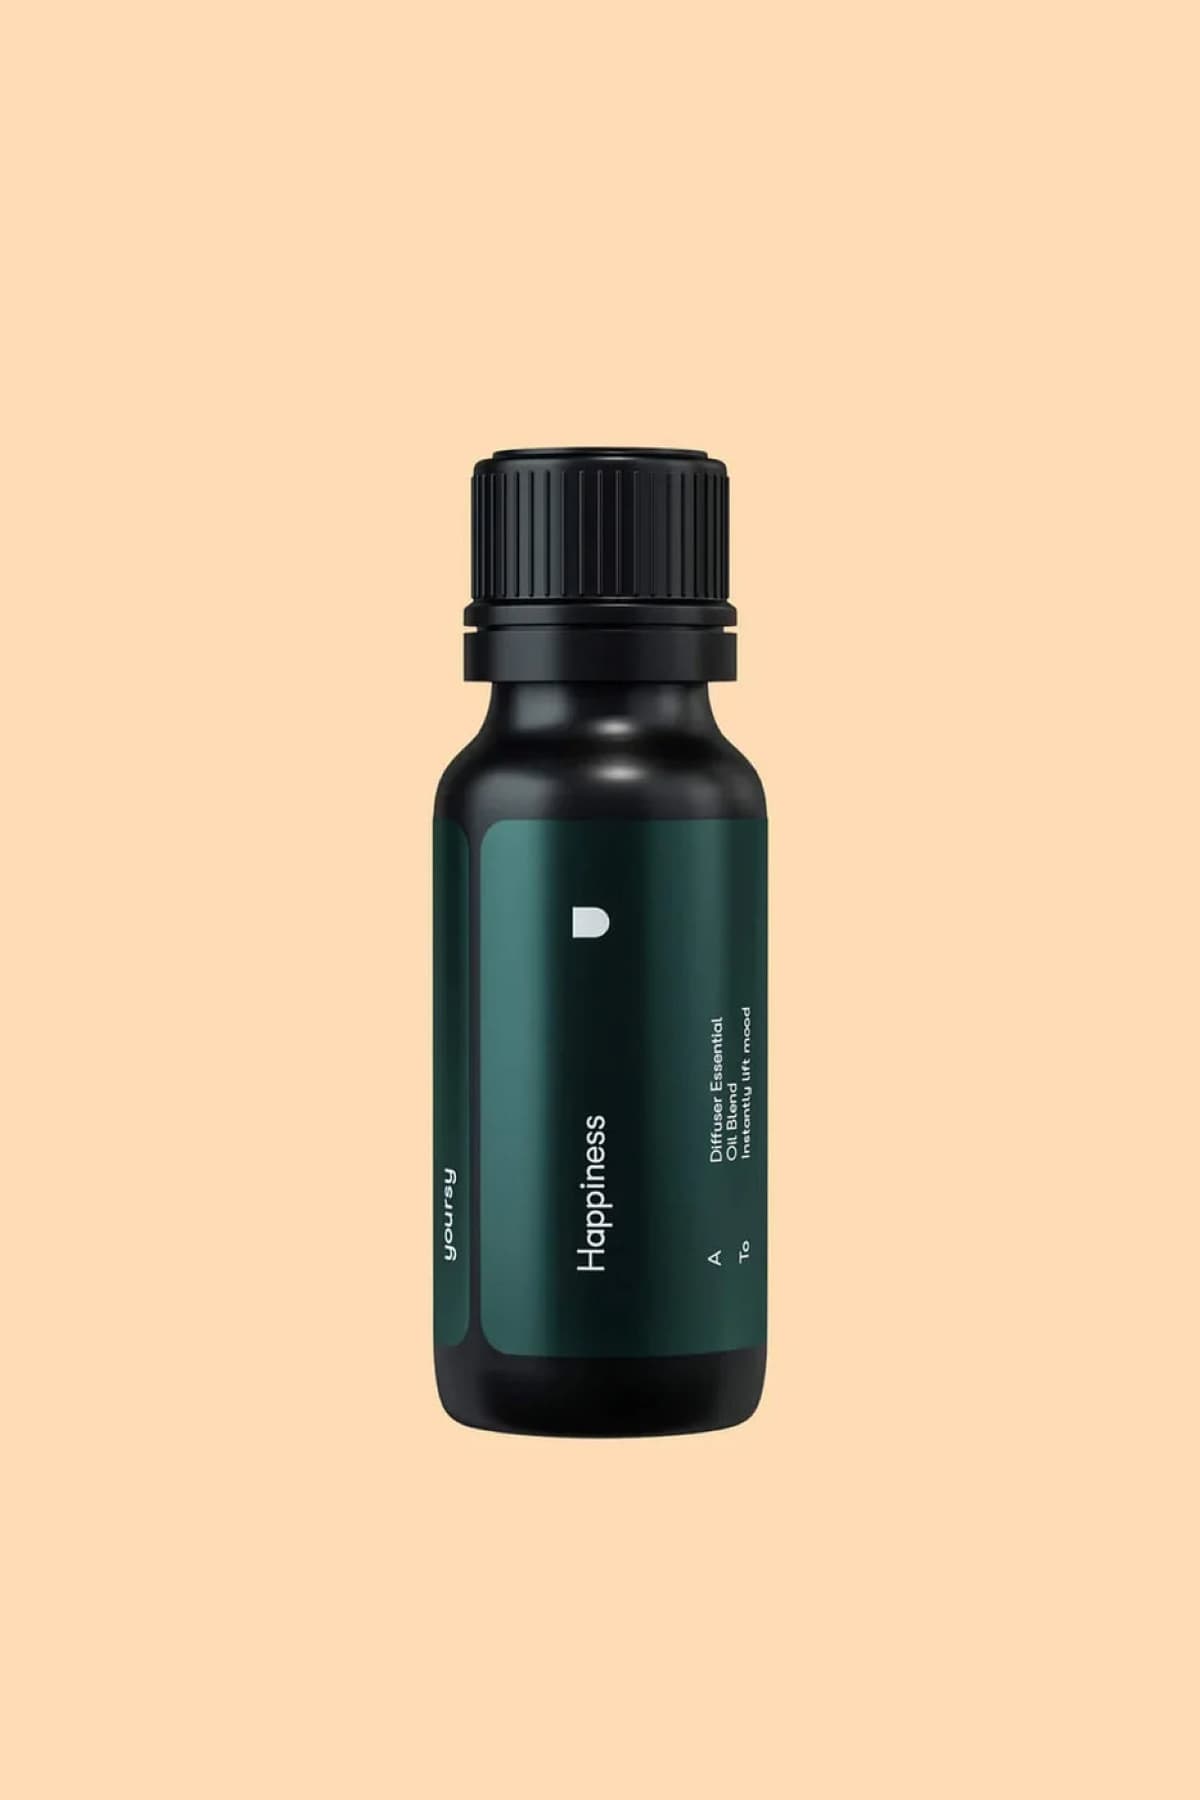 Happiness Diffuser Essential Oil Blend - Diffuser Oil